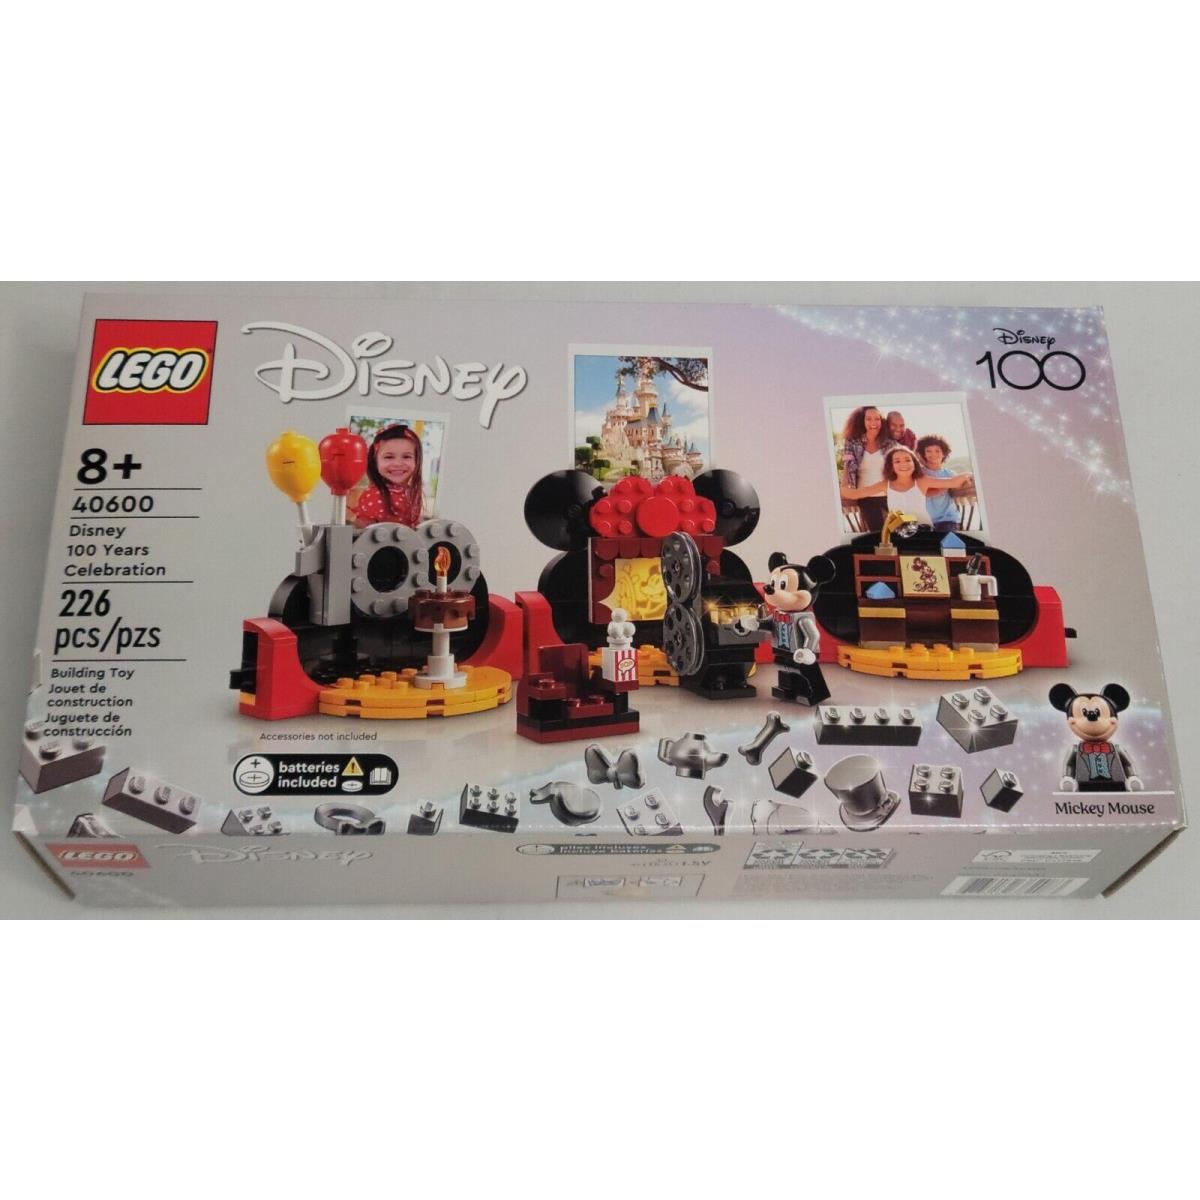 Lego 40600 Disney 100 Years Celebration Exclusive Gwp Mickey Mouse Light Brick